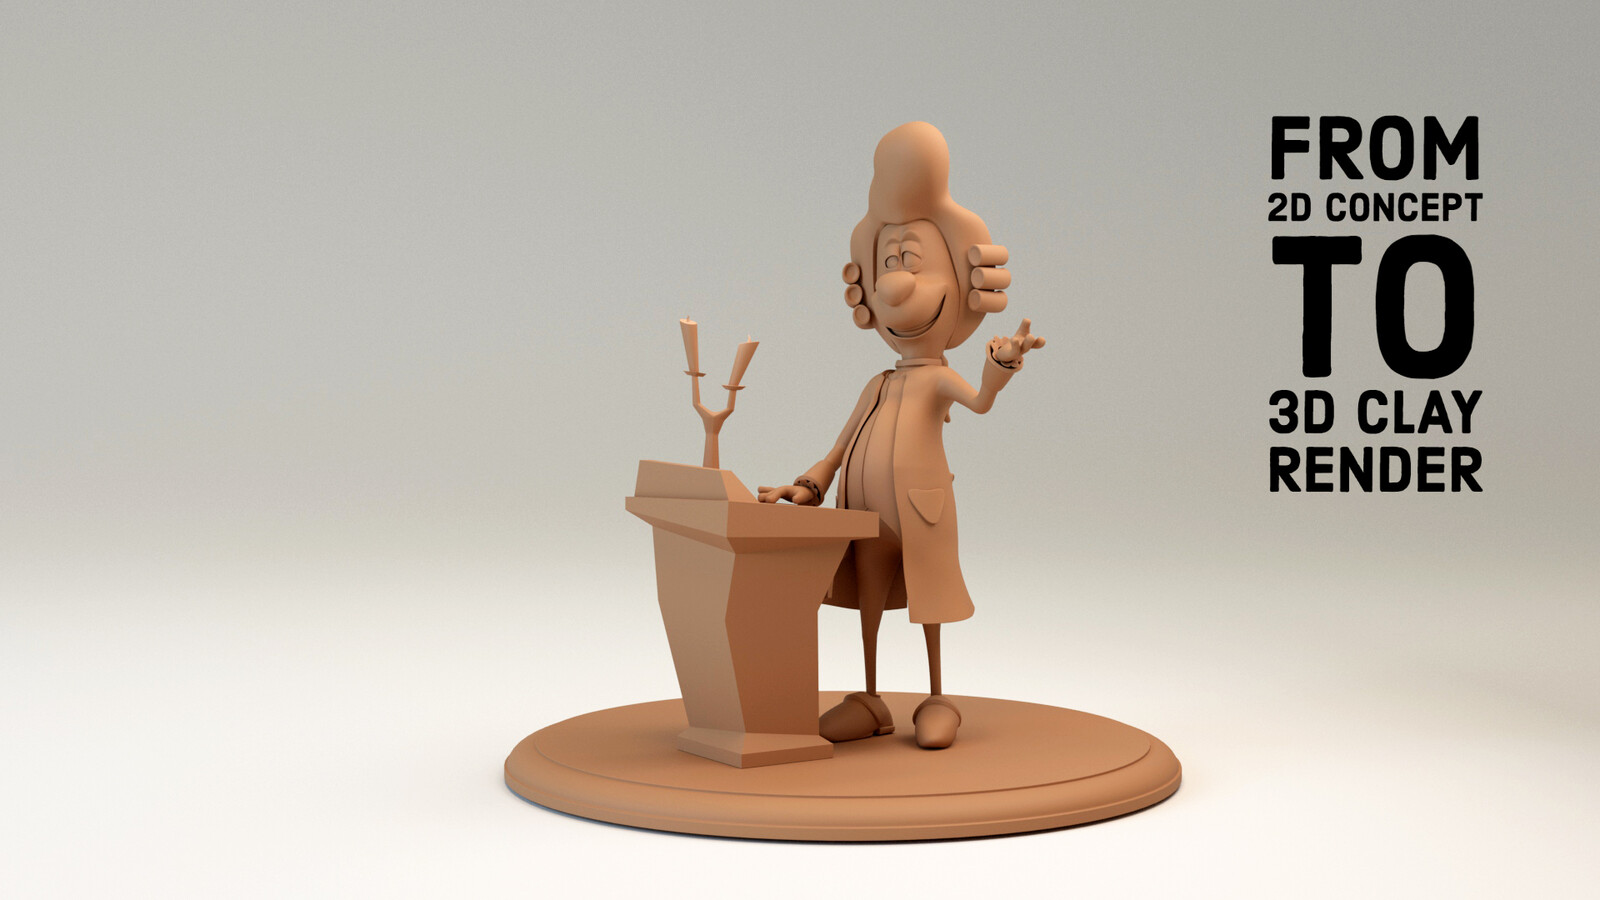 George the butler, 3D model and design